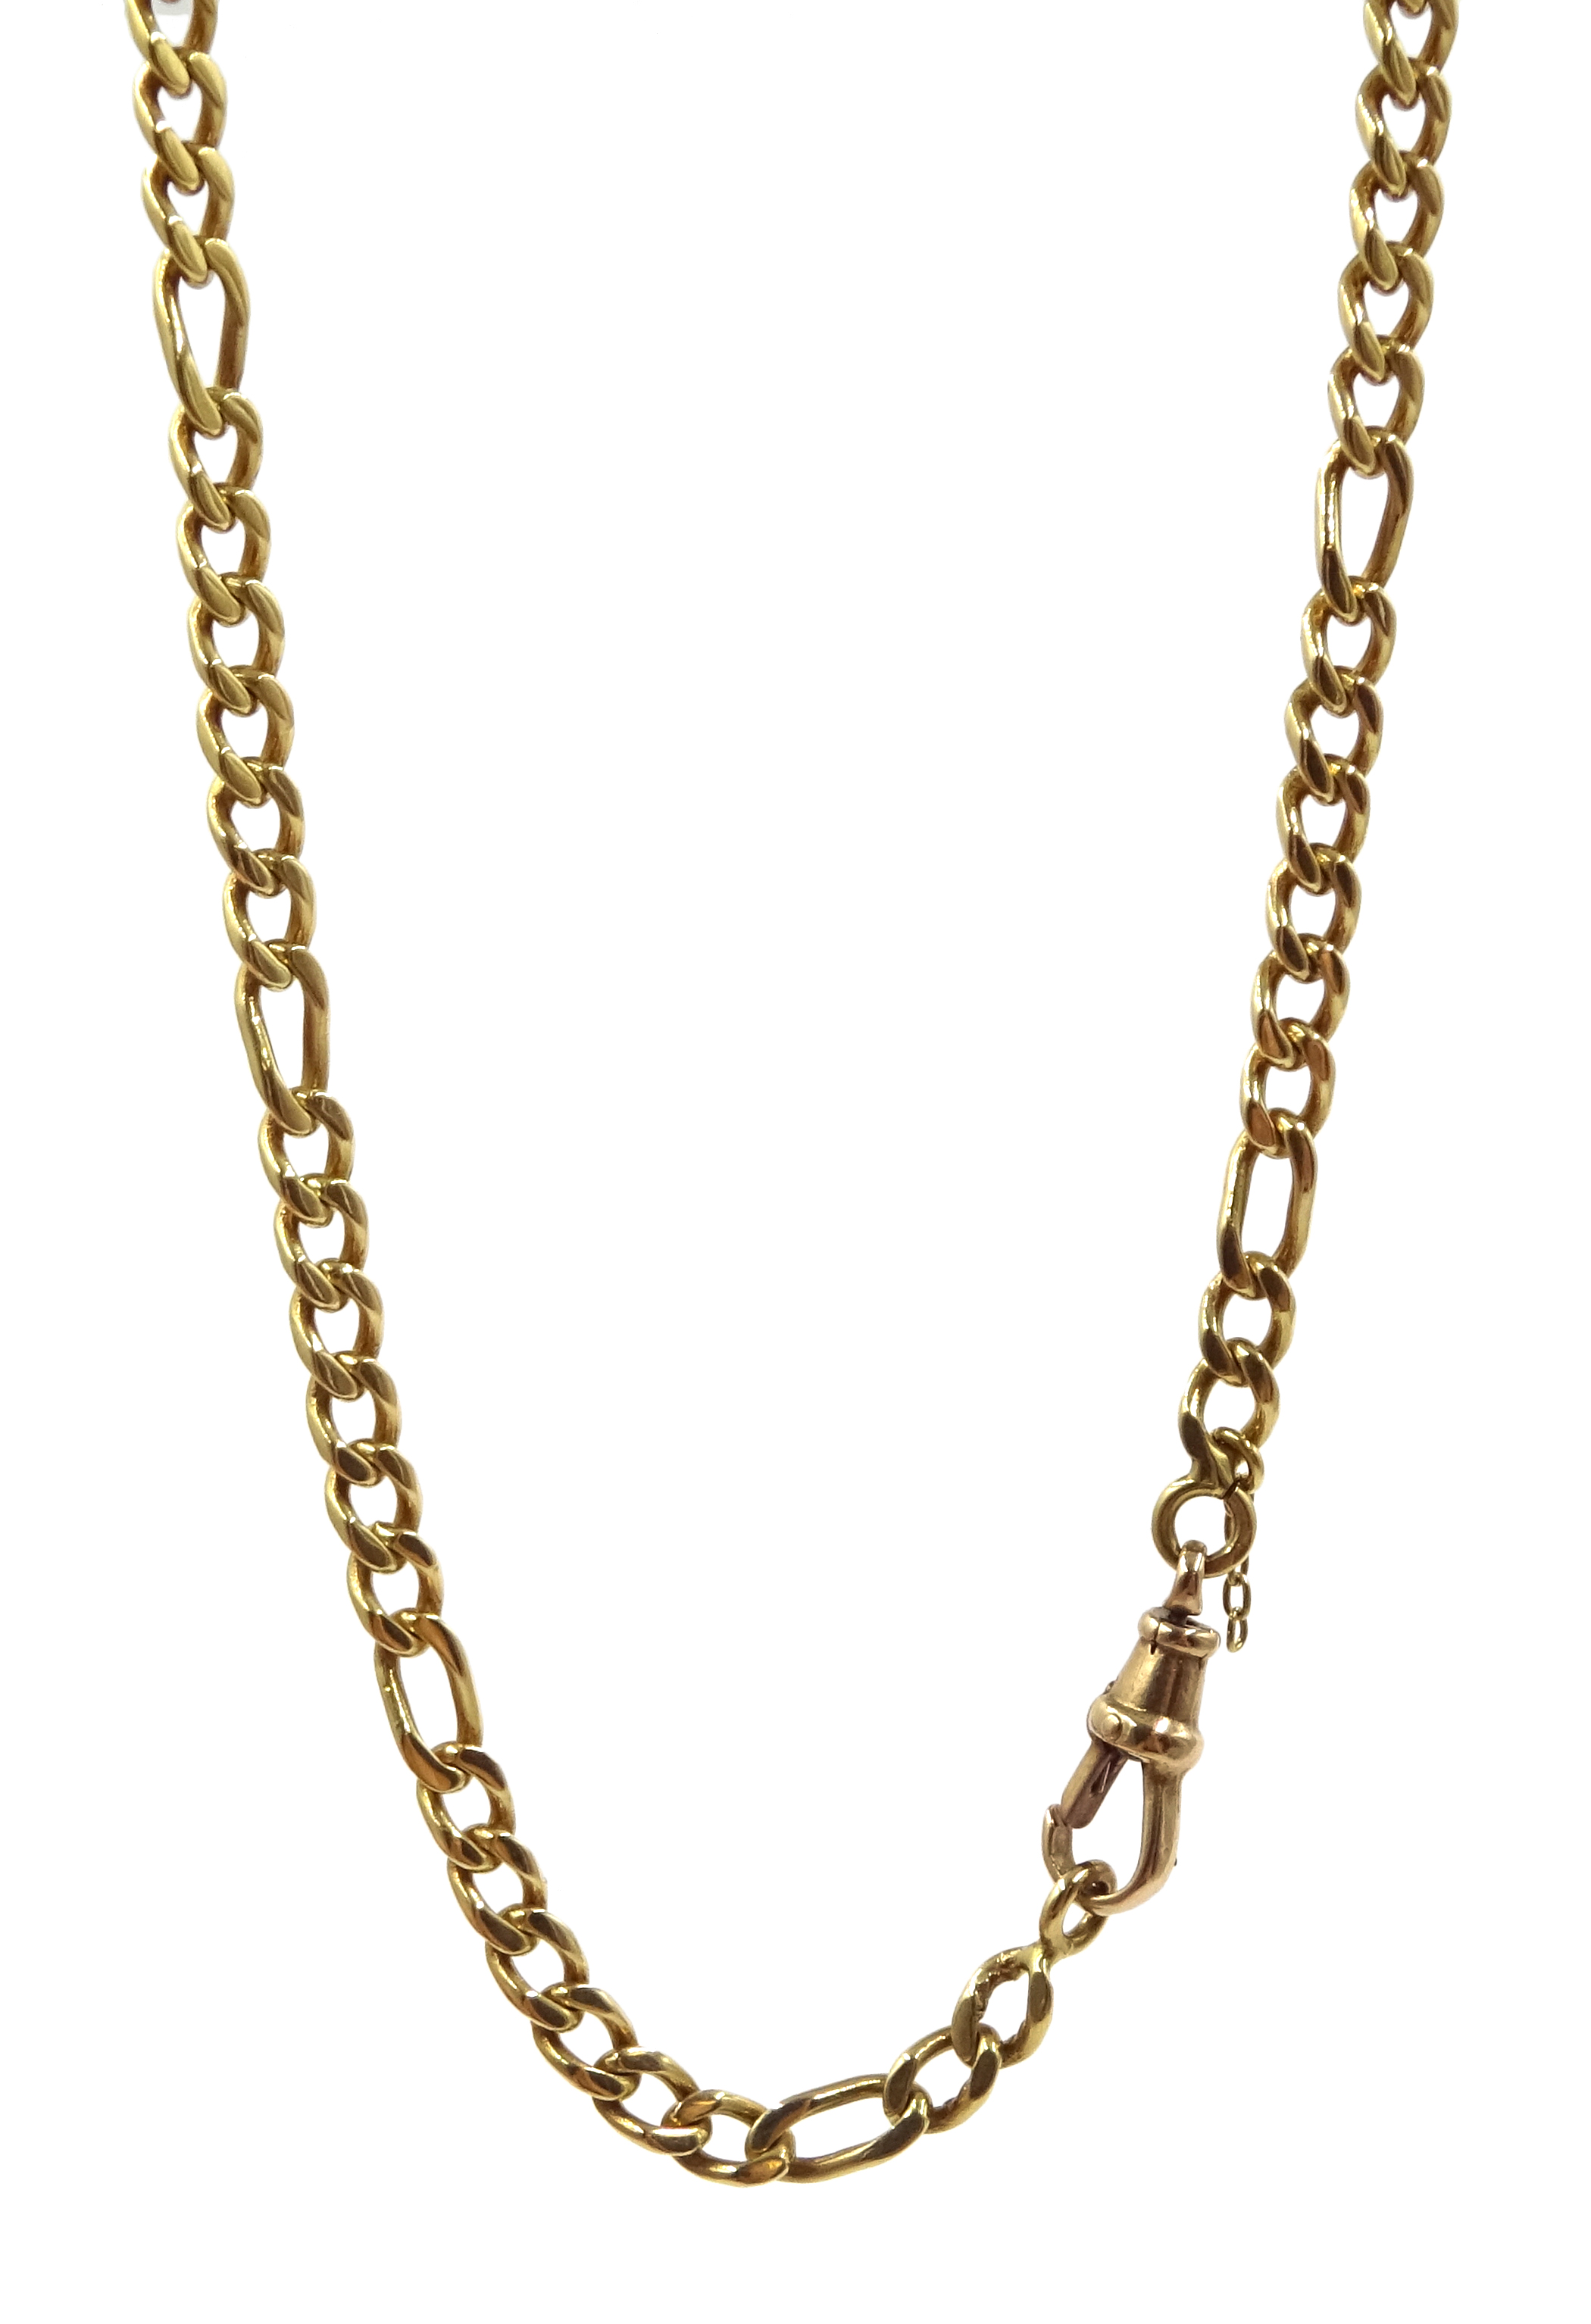 Gold figaro link chain necklace, stamped 18ct, with gold clip stamped 9kt